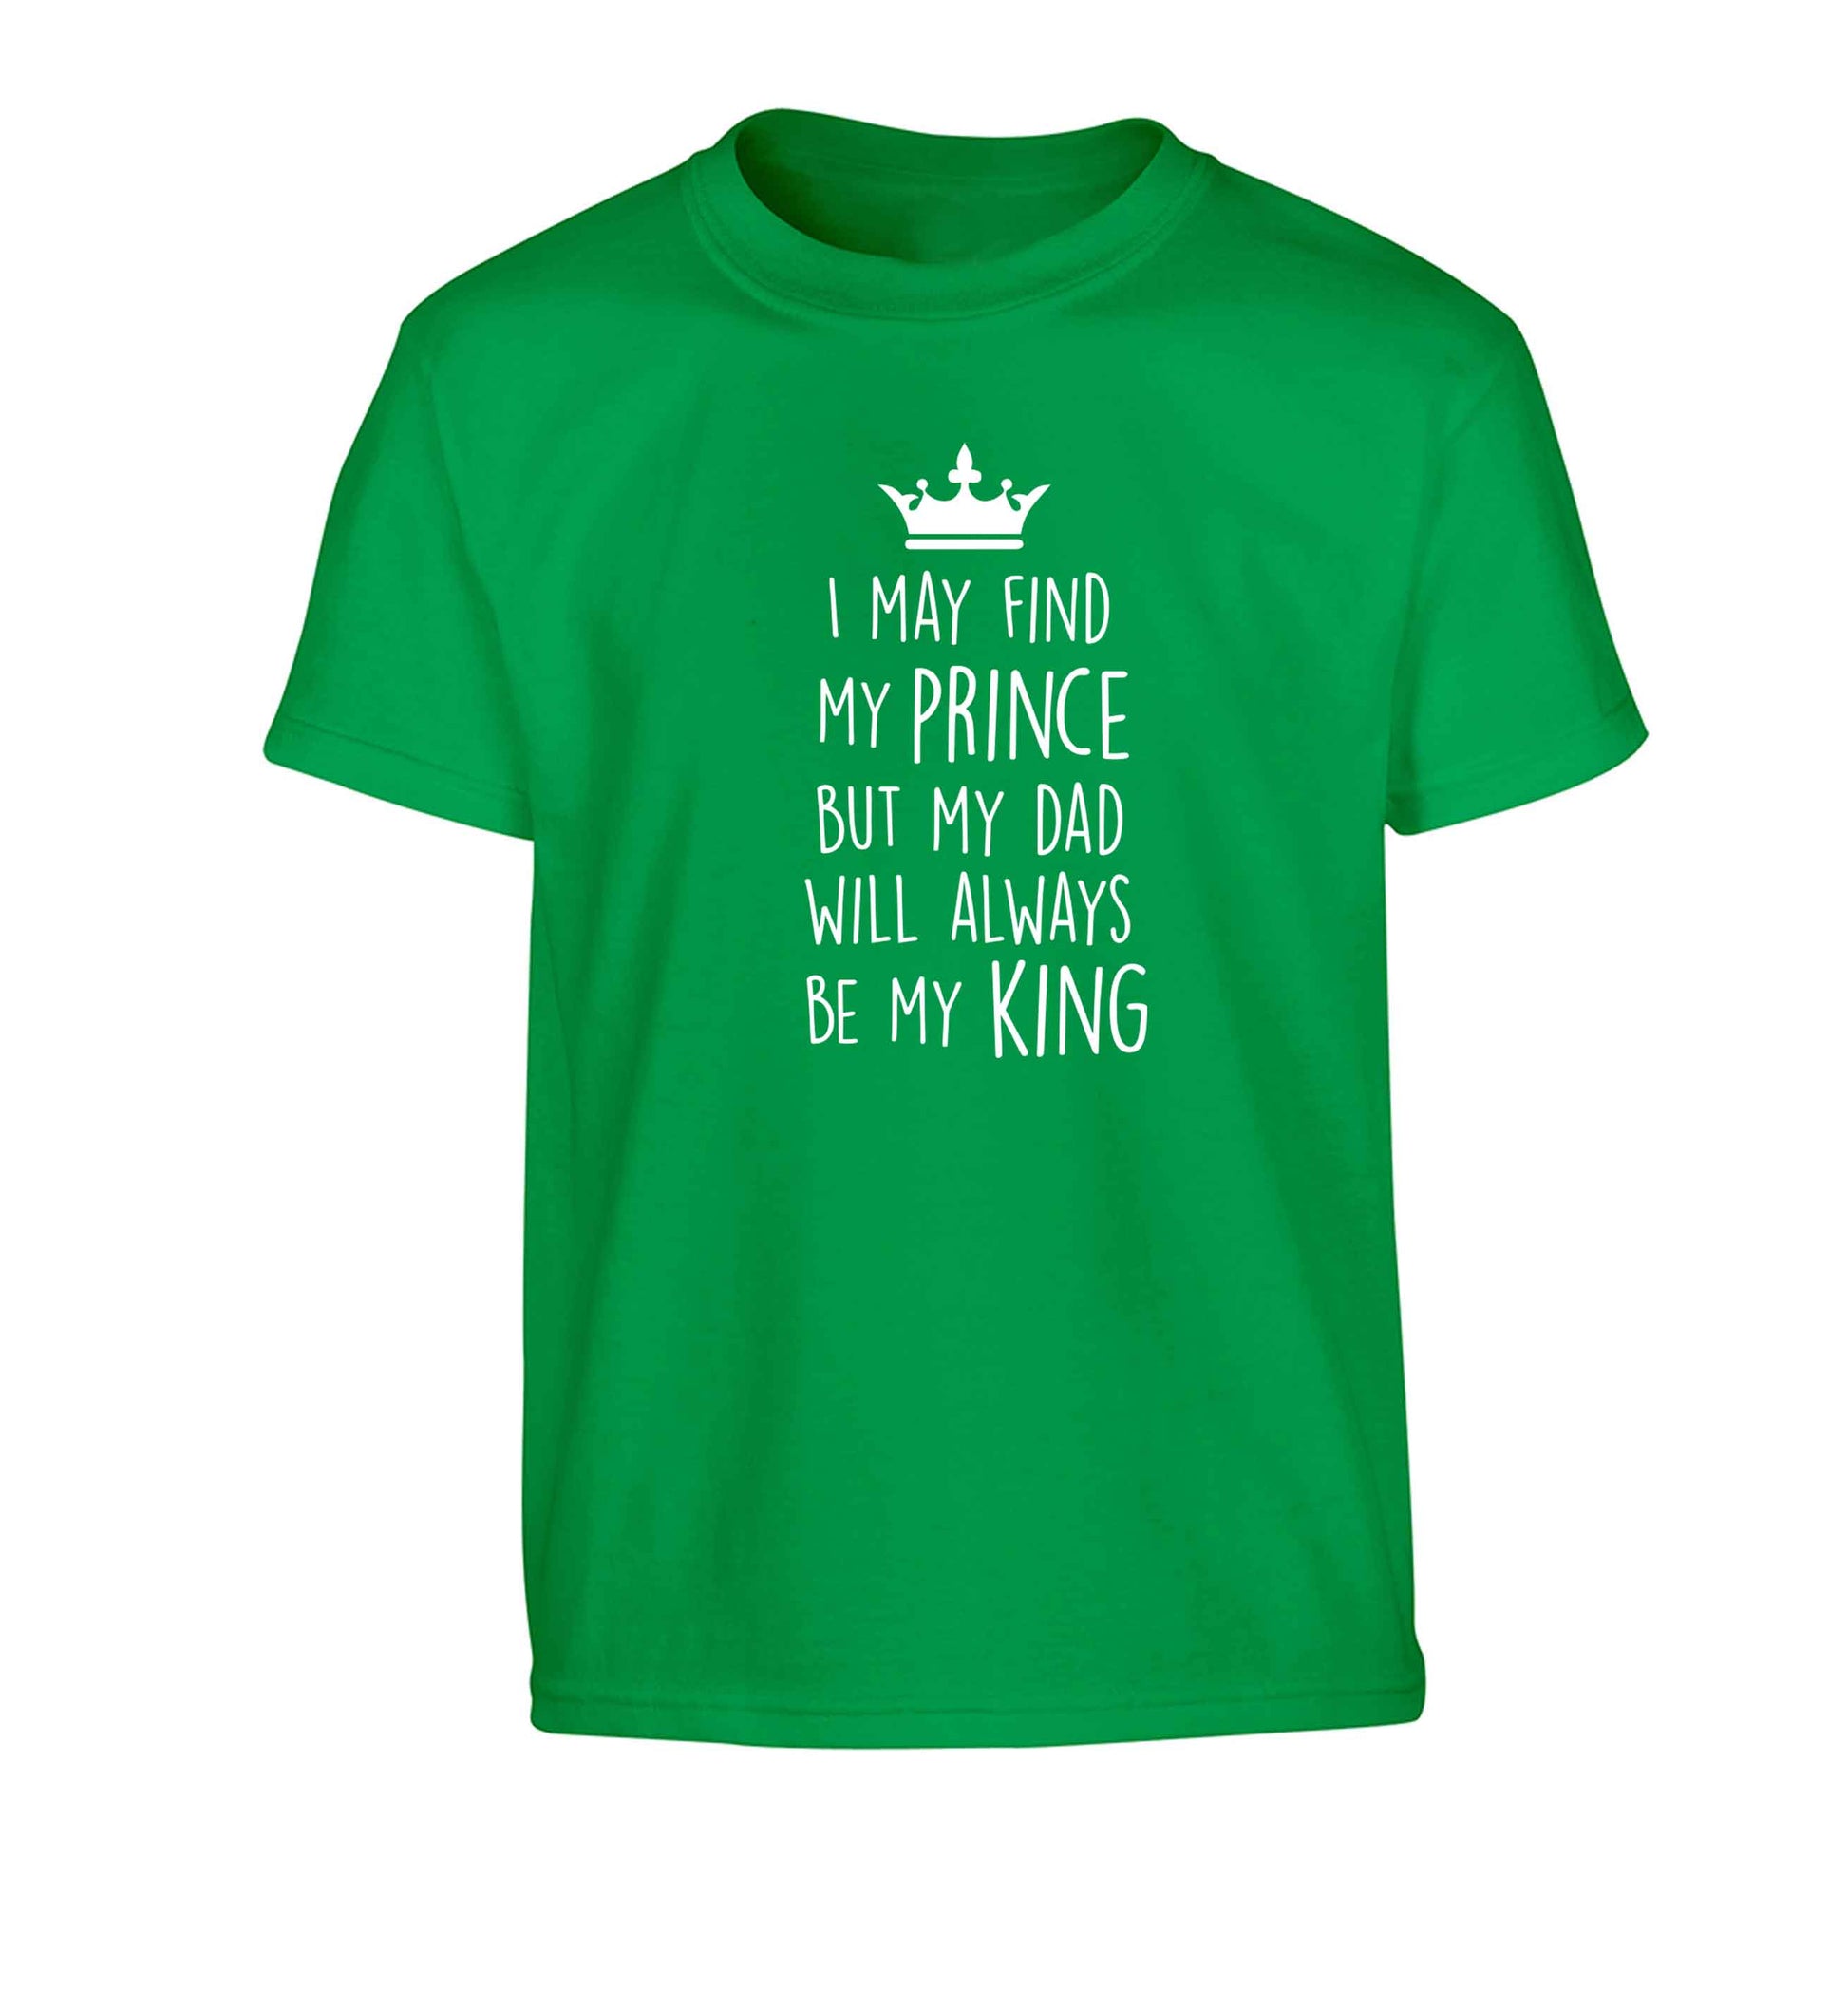 I may find my prince but my dad will always be my king Children's green Tshirt 12-13 Years